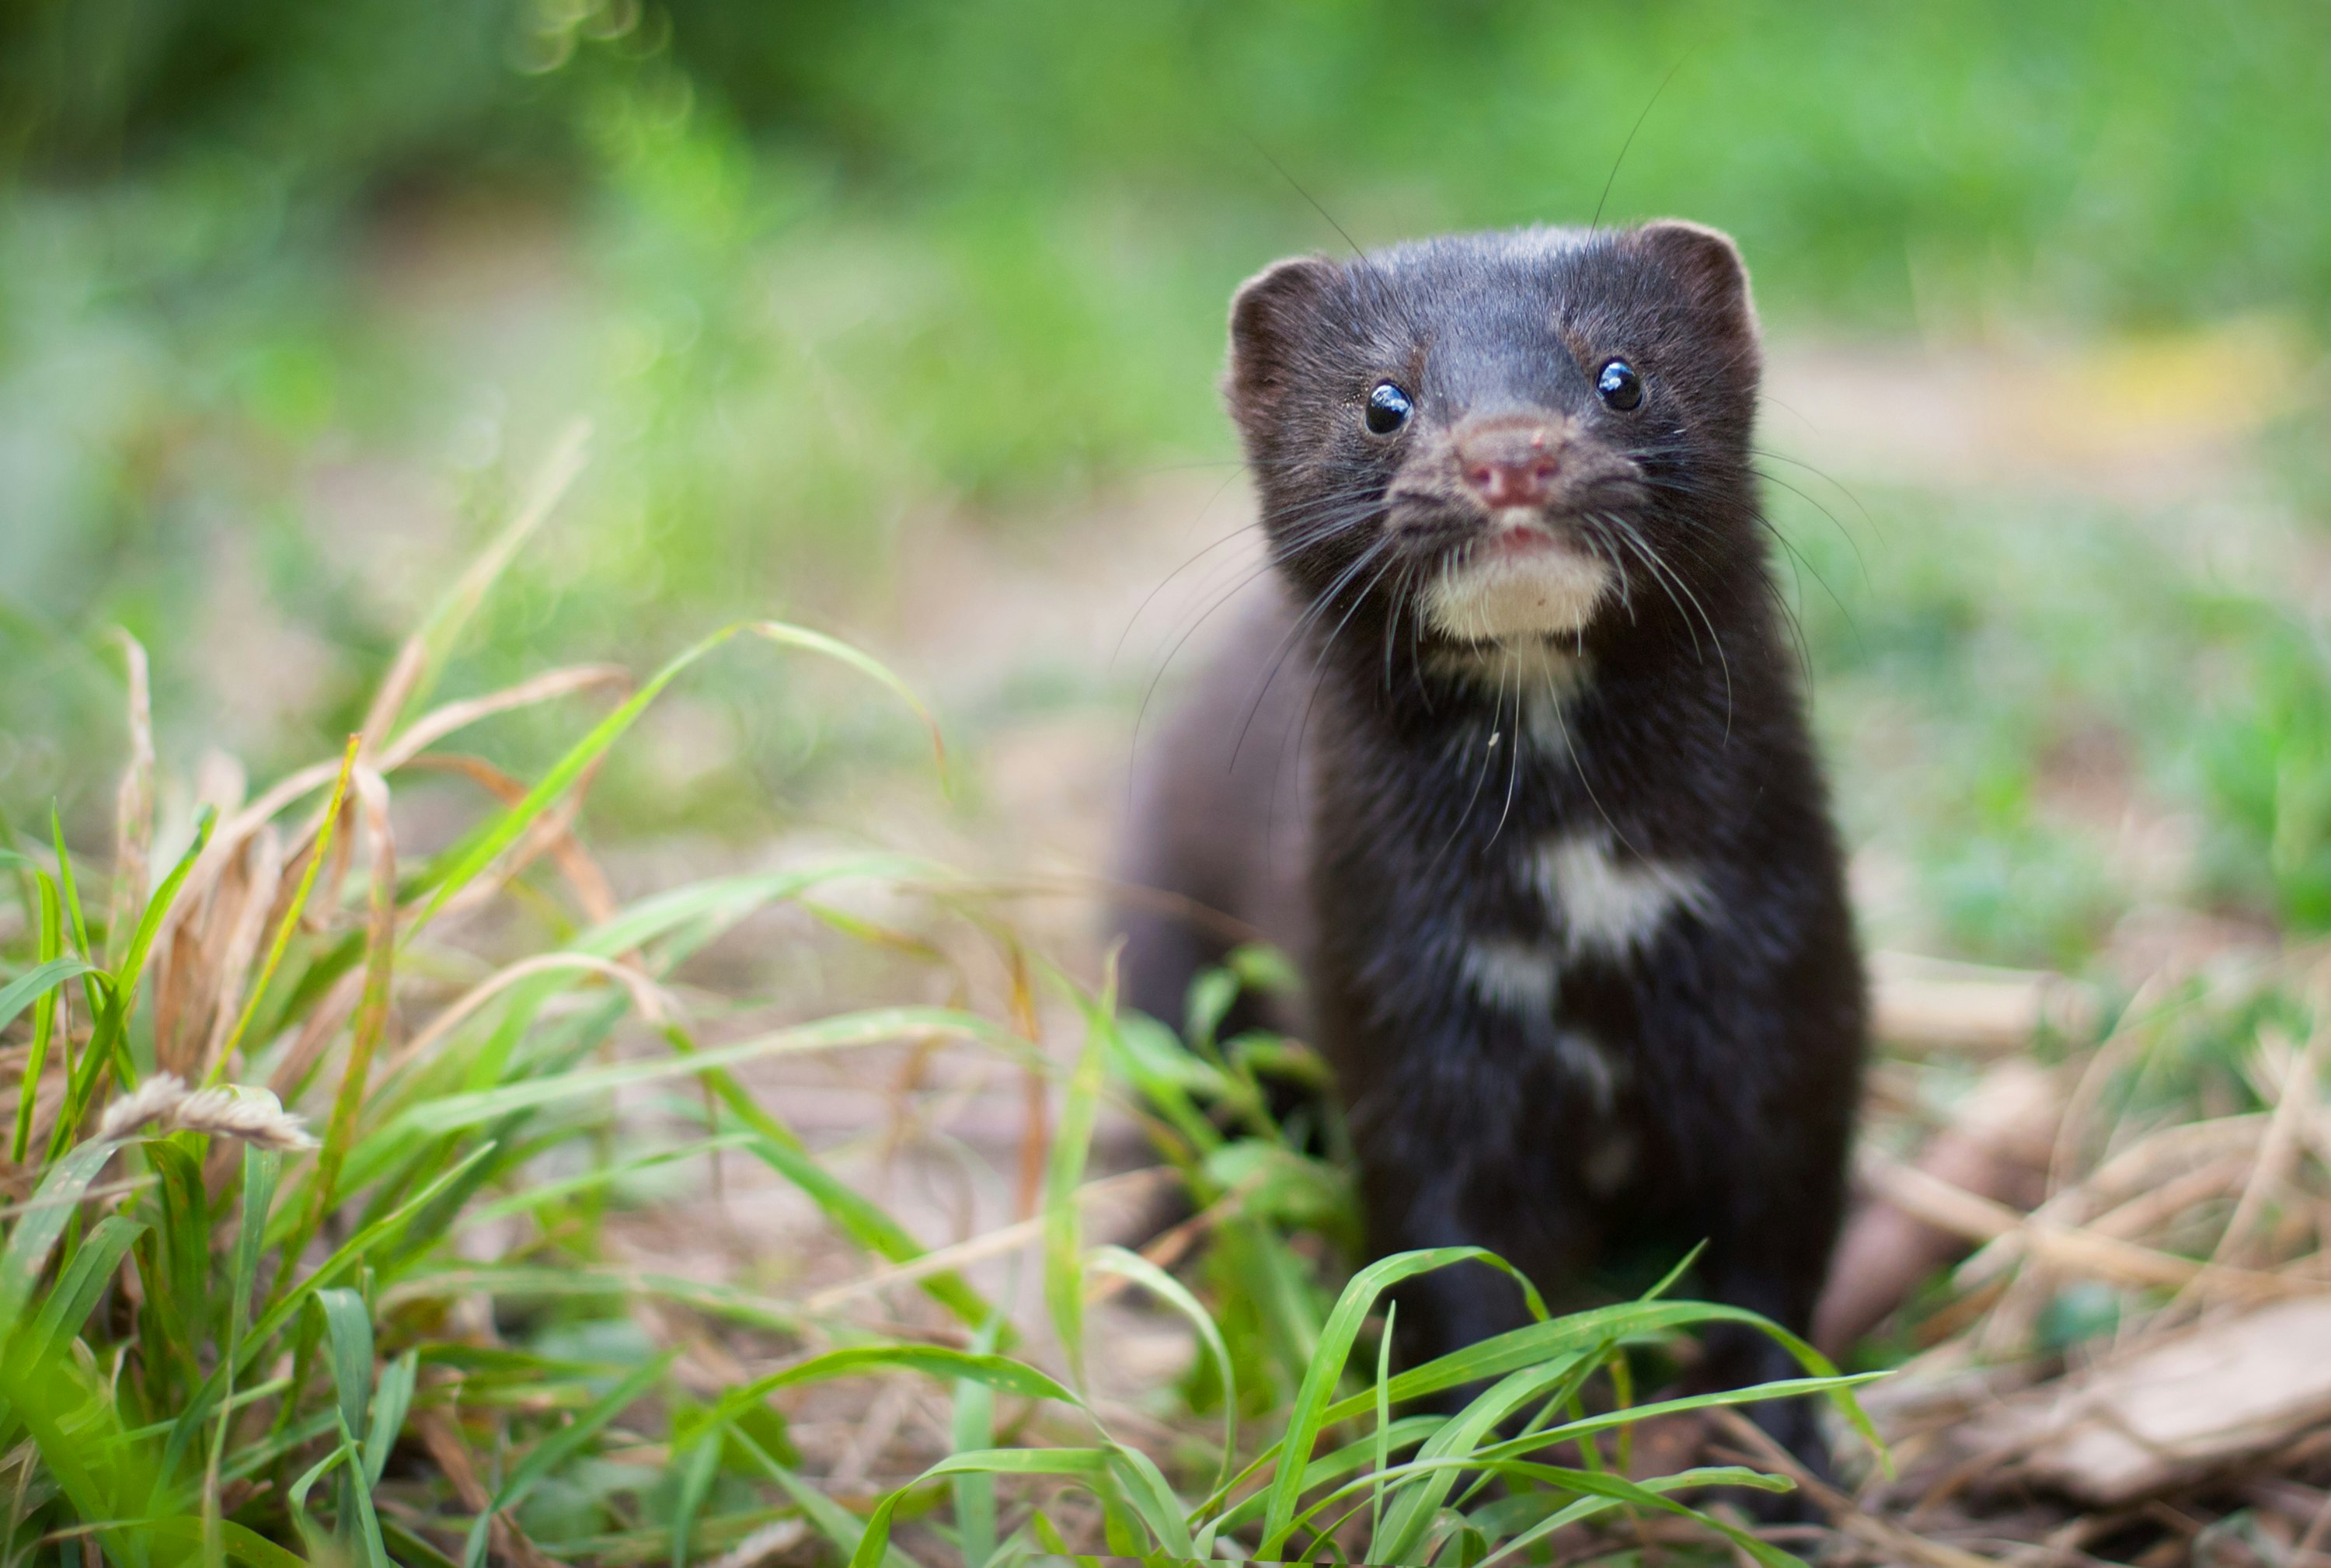 An American mink standing in some grass